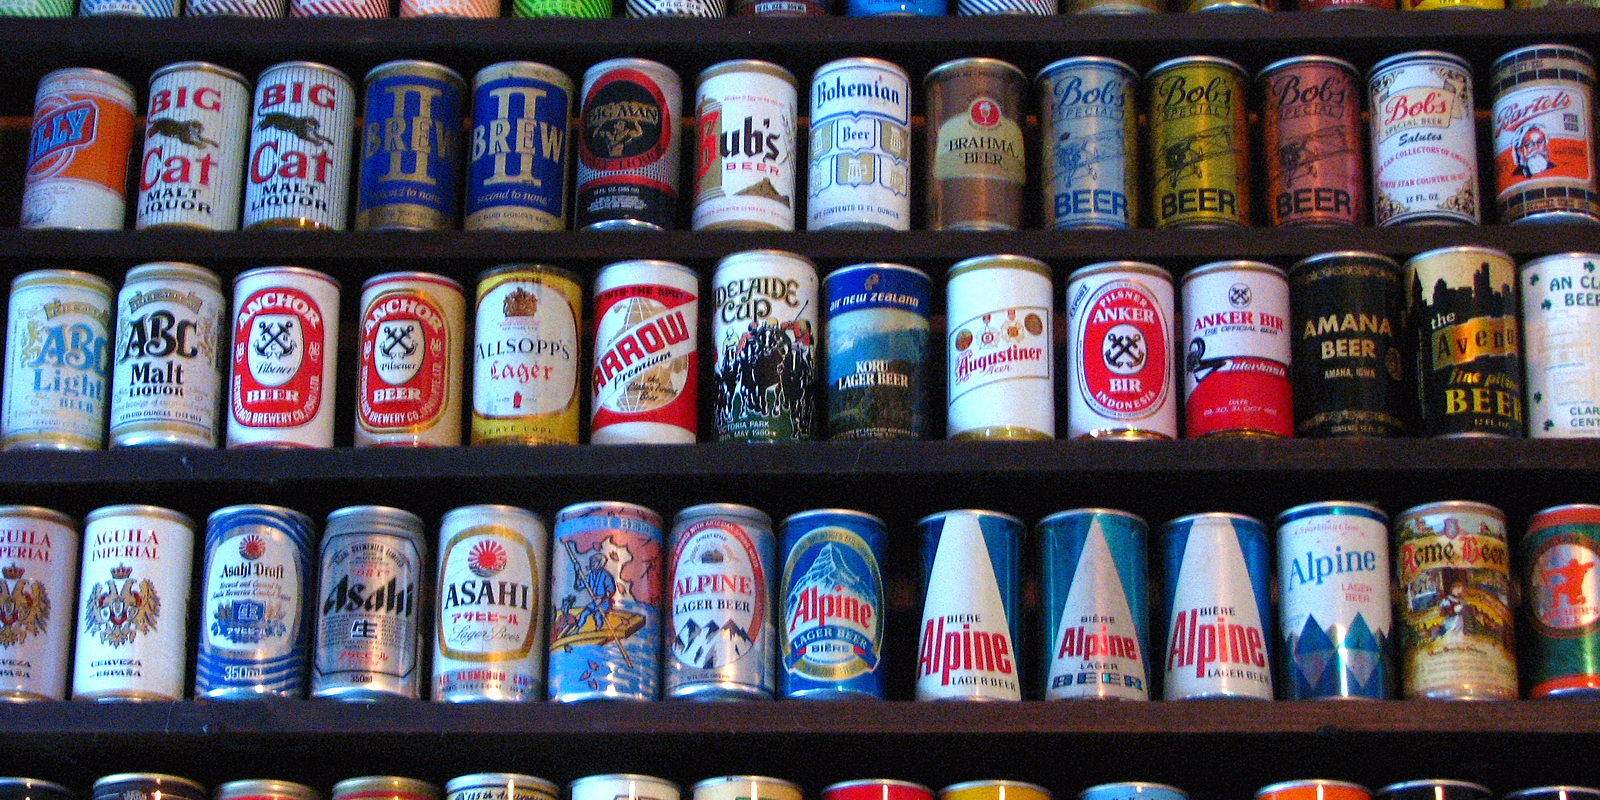 Cans of beer from the Beer Can Museum